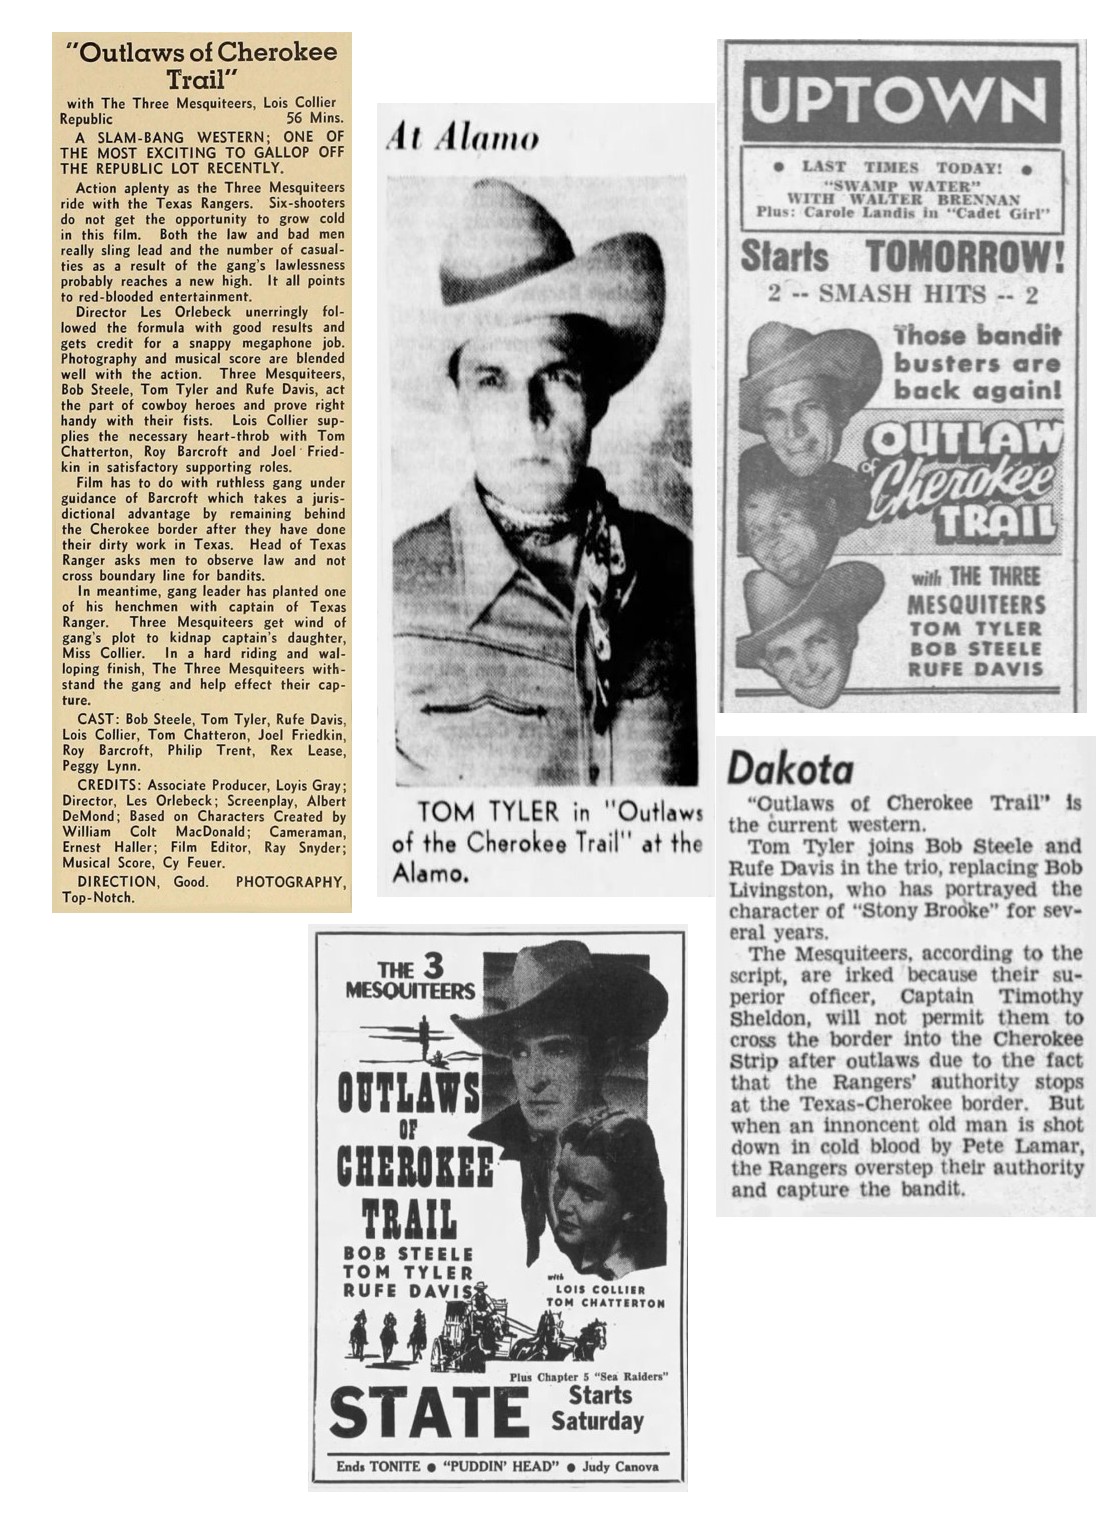 Outlaws of Cherokee Trail film reviews cinema ads